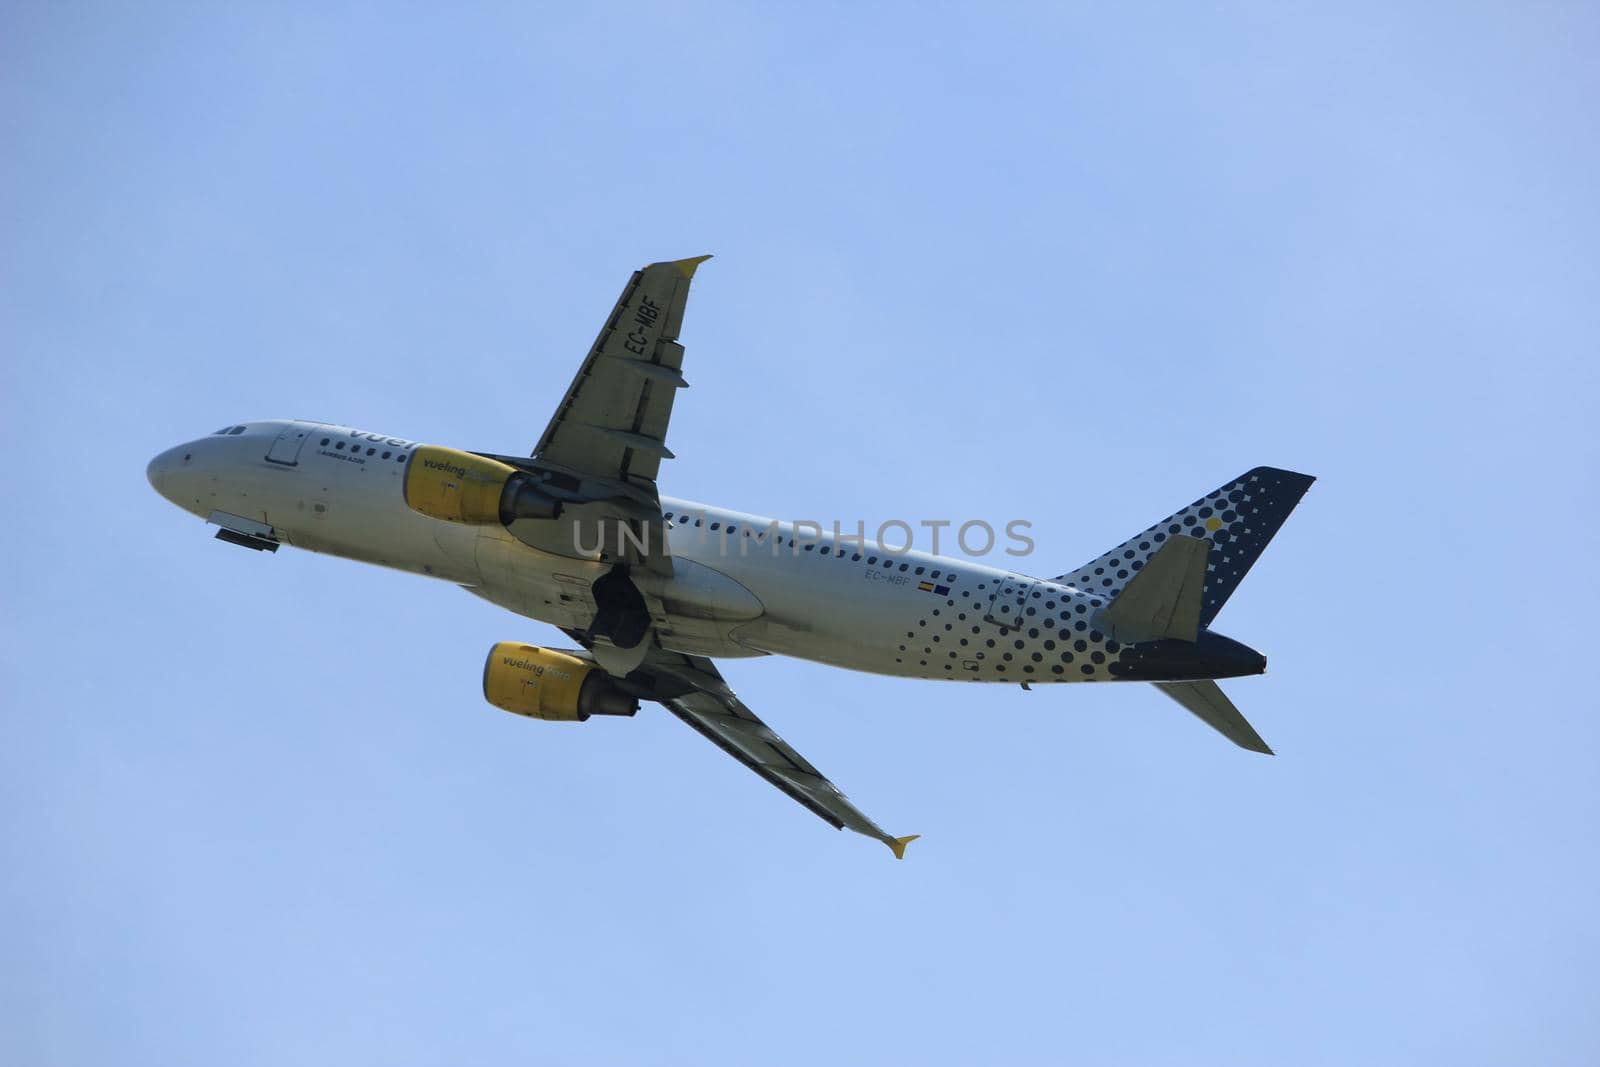 Amsterdam the Netherlands - July, 9th 2017: EC-MBF Vueling Airbus A320 by studioportosabbia